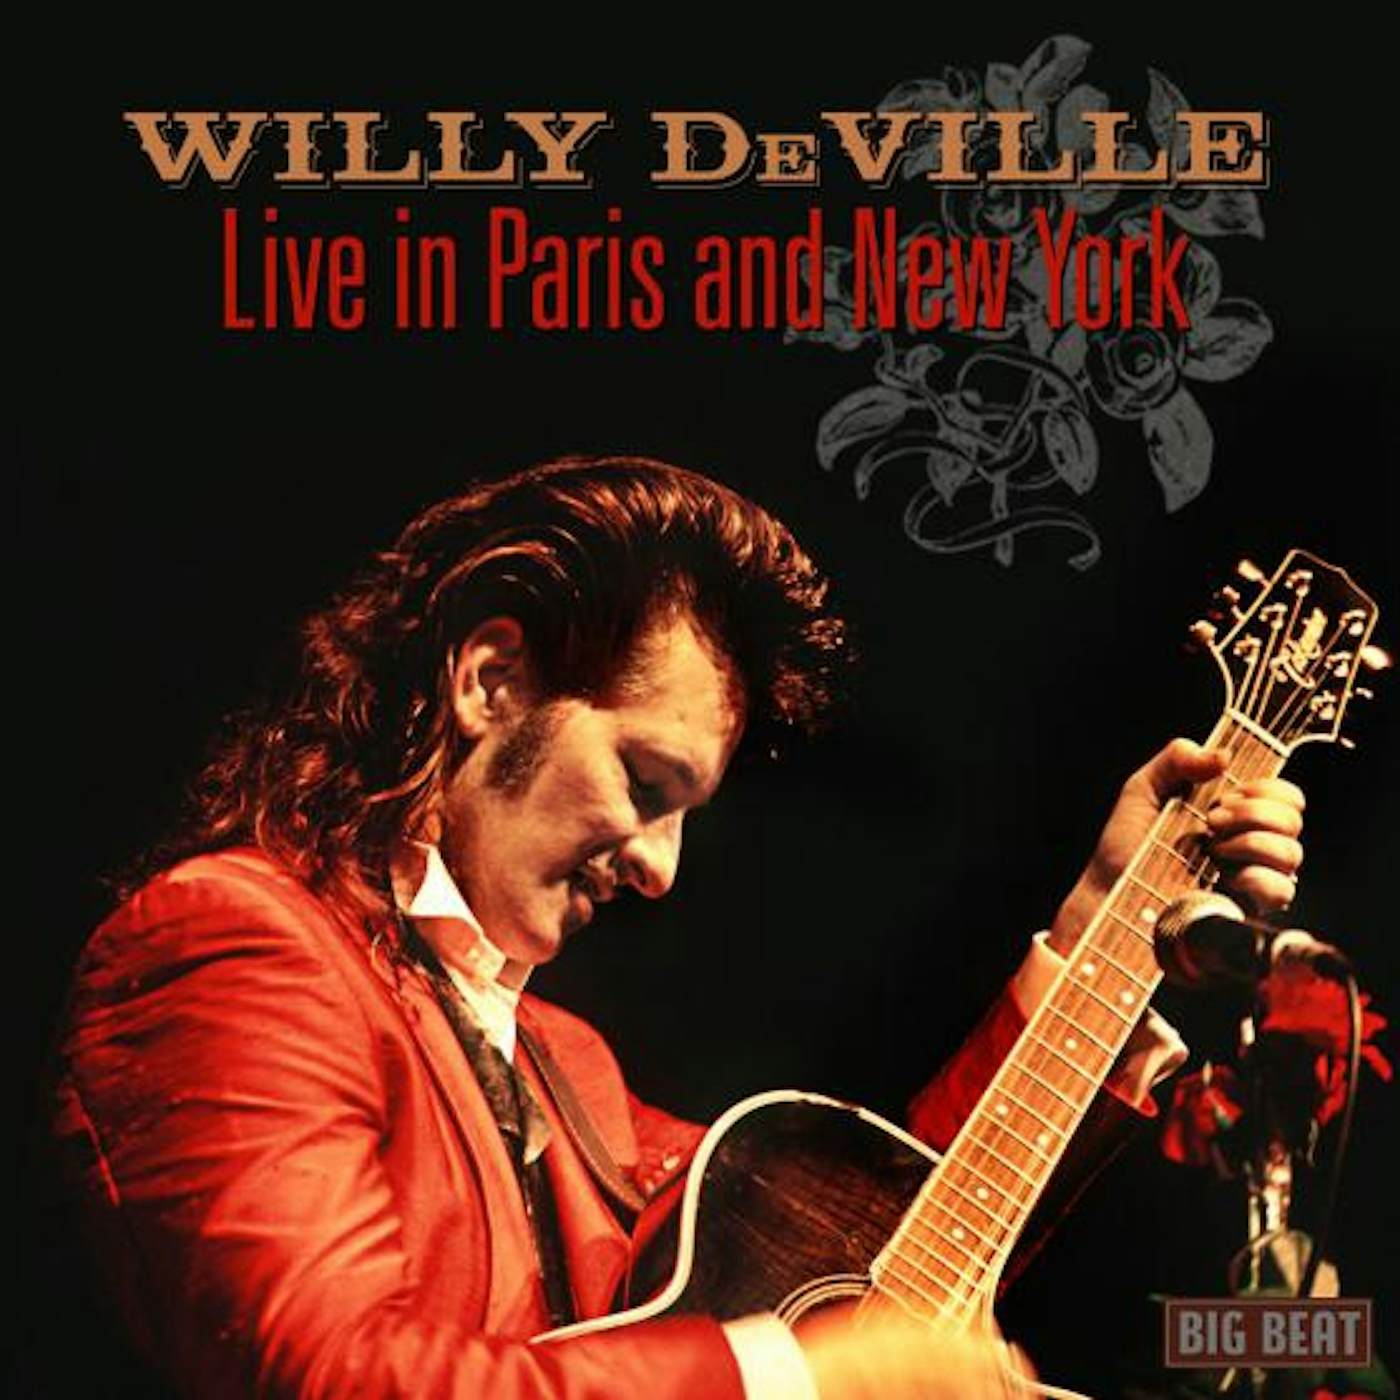 Willy DeVille LIVE IN PARIS & NEW YORK CD